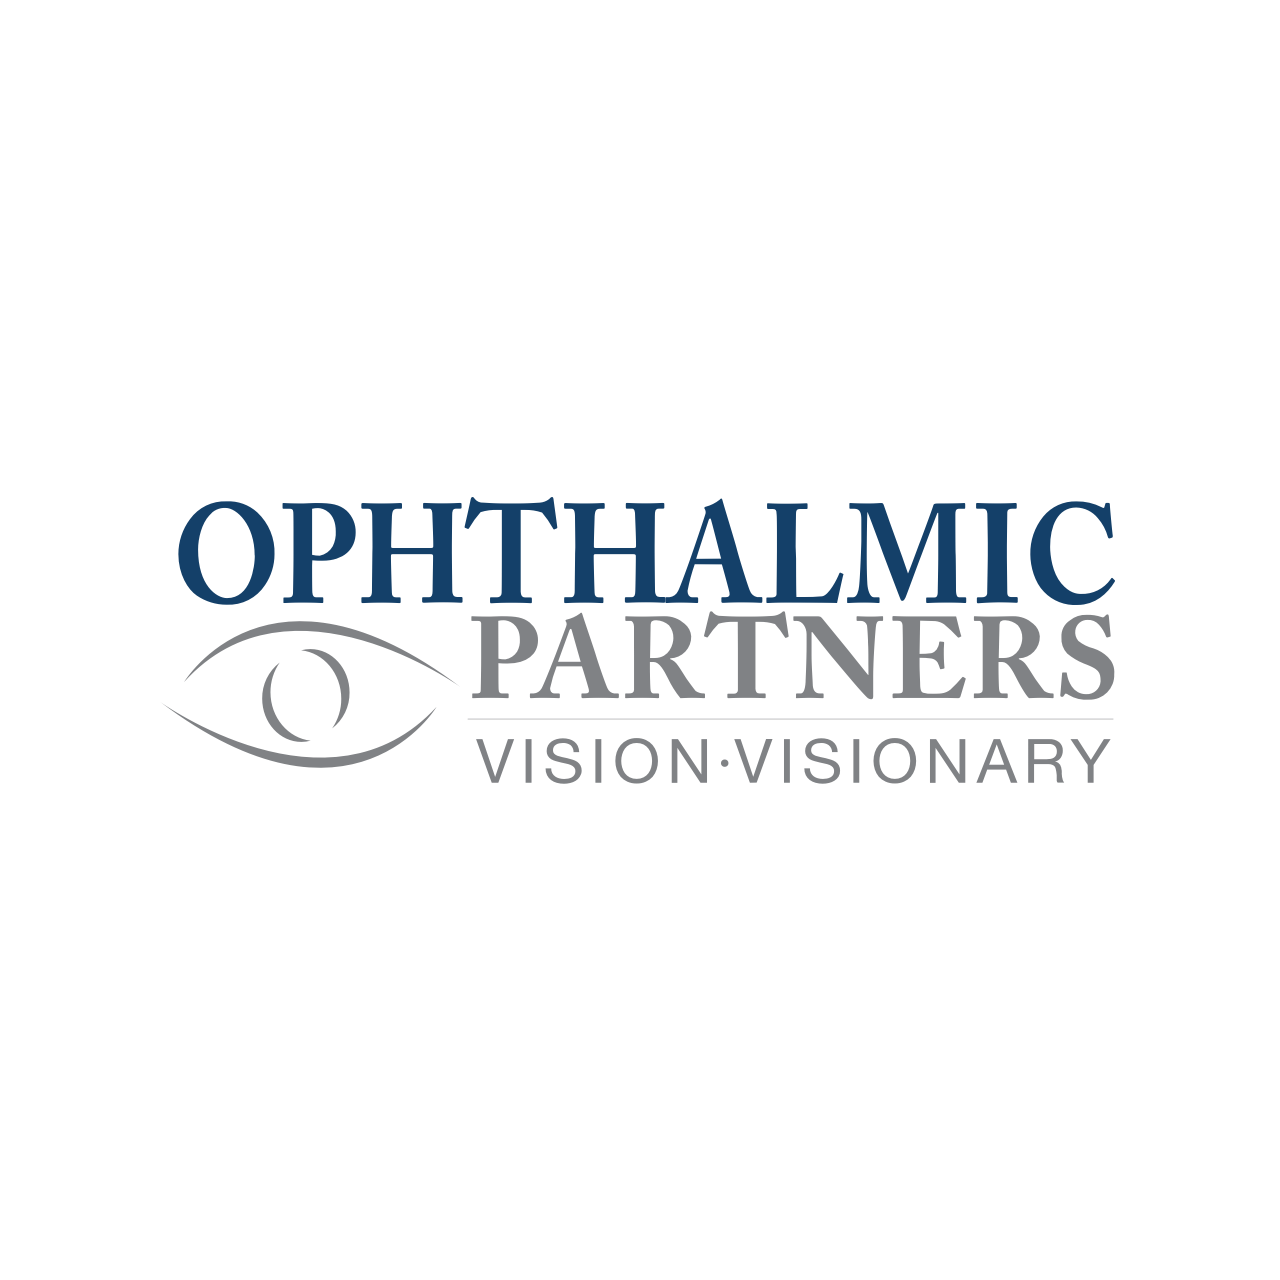 Ophthalmic Partners